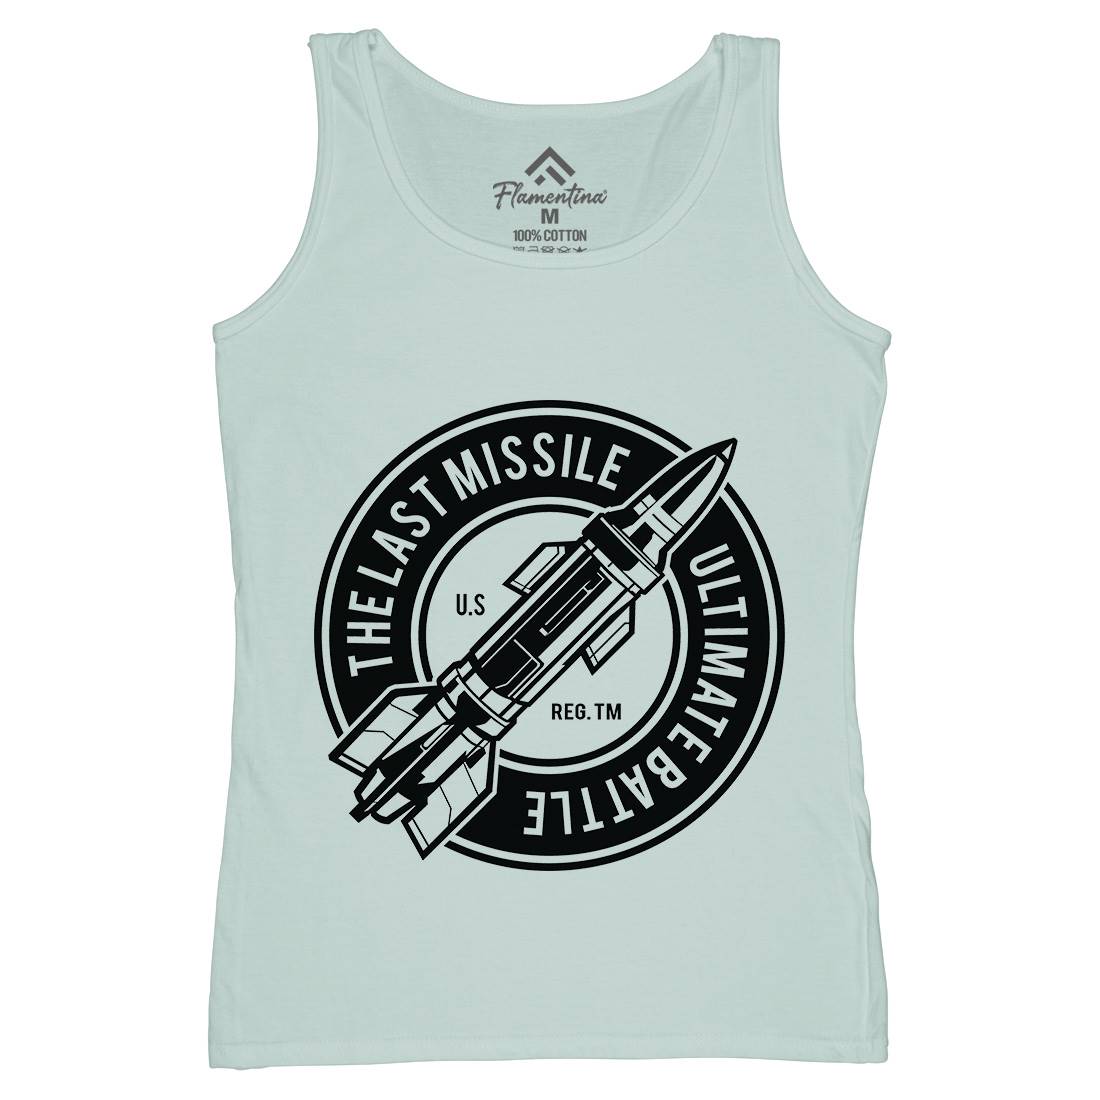 Last Missile Womens Organic Tank Top Vest Army A175